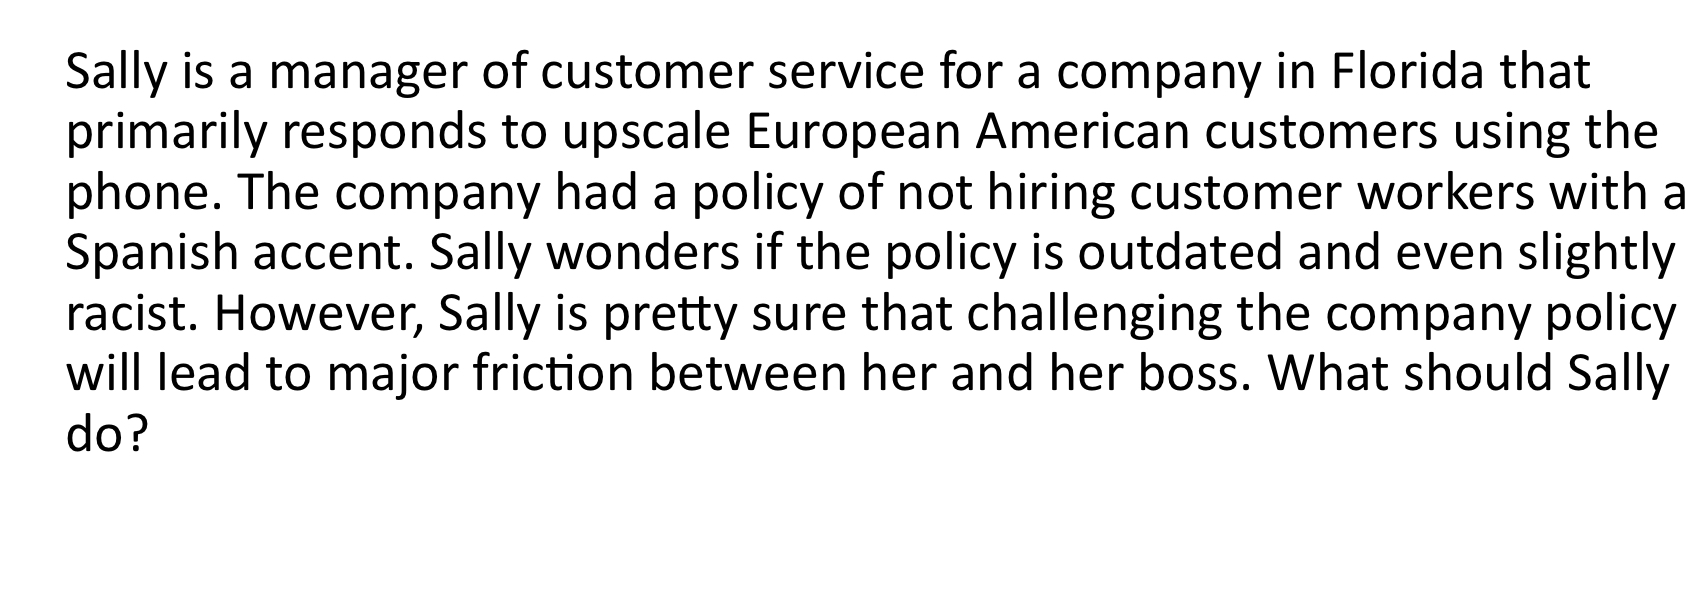 Sally is a manager of customer service for a company in Florida that primarily responds to upscale European